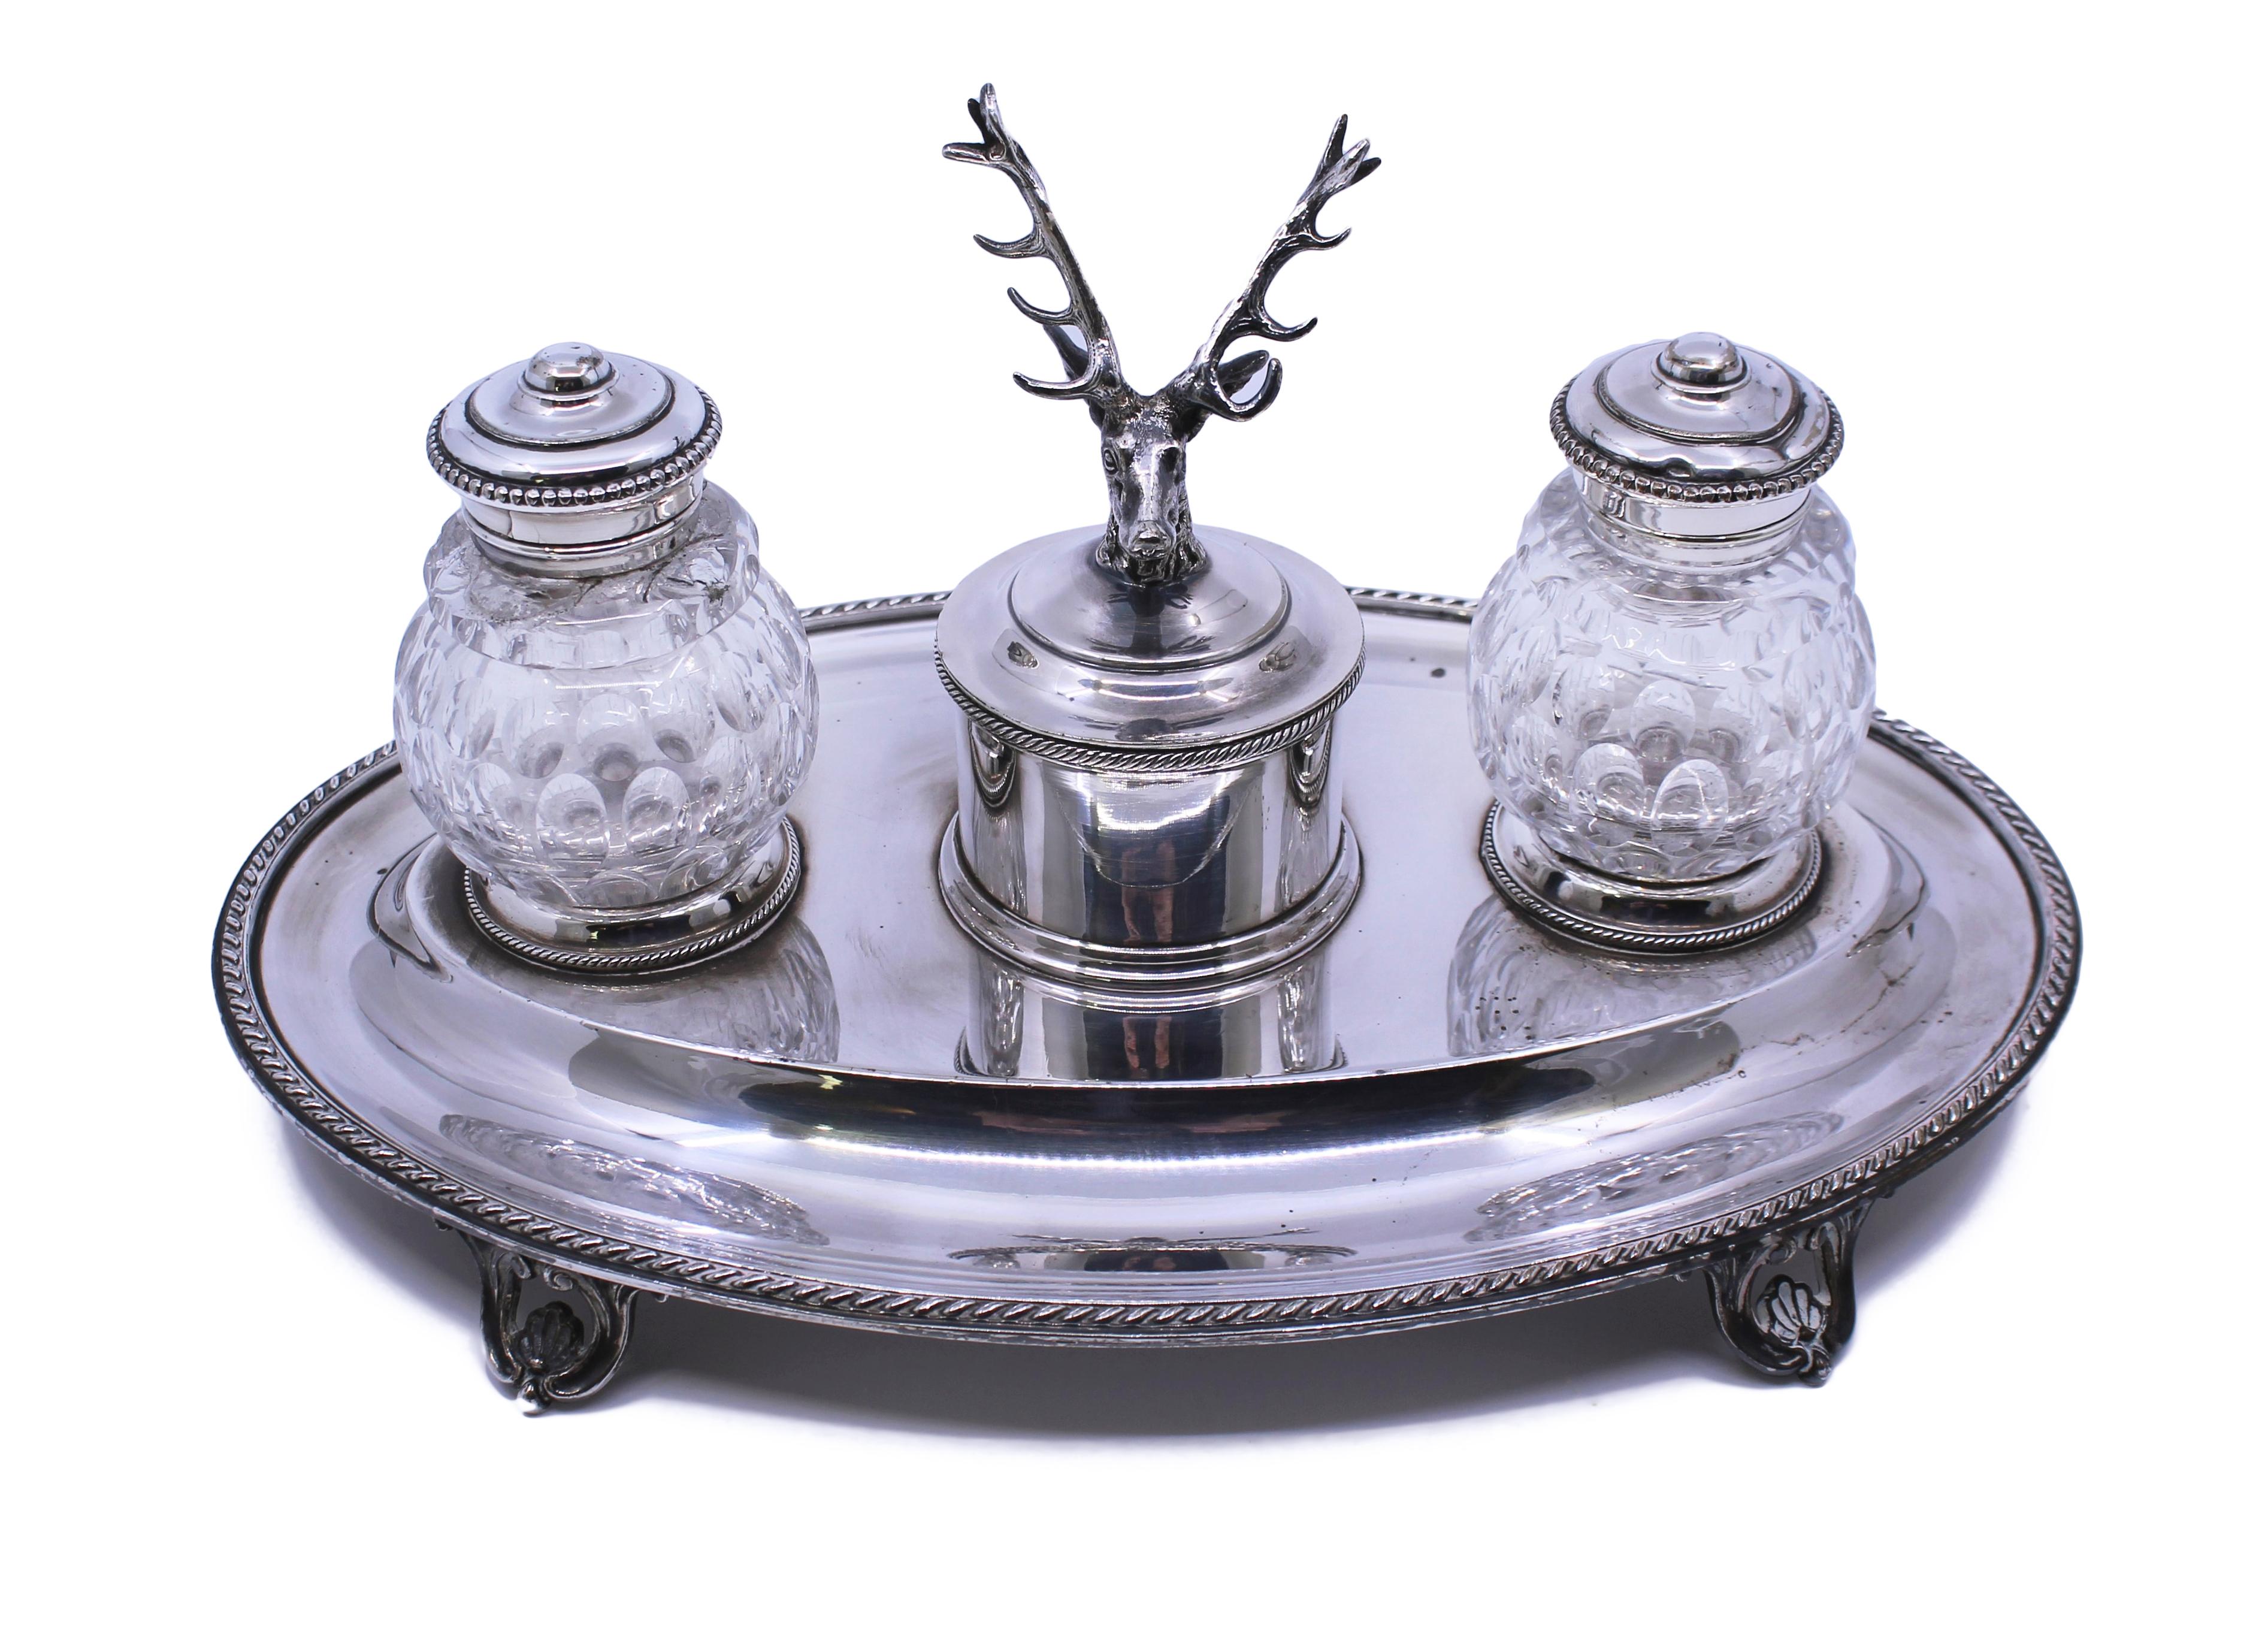 Victorian silver plate & cut glass inkwell


Period 19th c., English,

Manufacturer Elkington & Co

Composition Silver plate & crystal

Dimensions 31 x 21 x 16 cm

Condition Very good condition commensurate with age.
 


